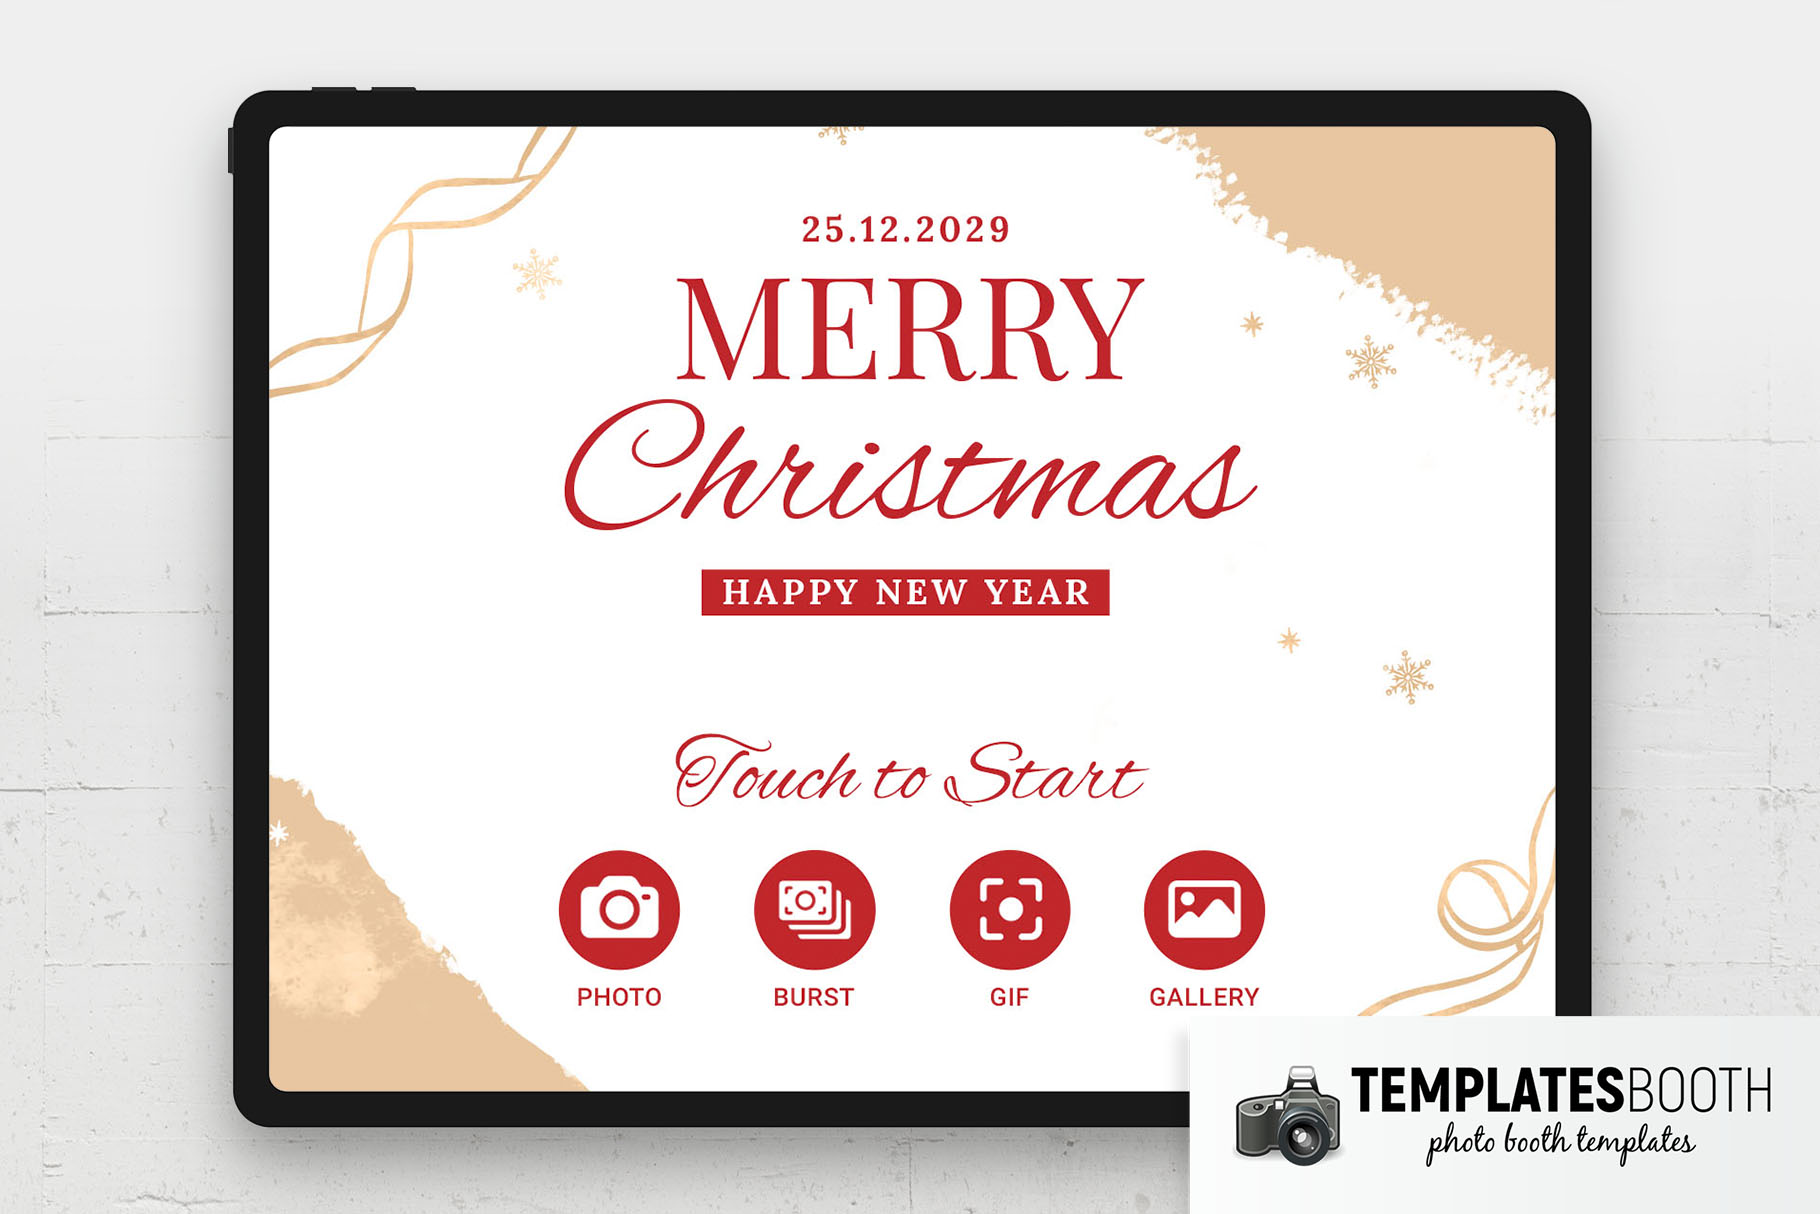 Free Christmas Photo Booth Welcome Screen